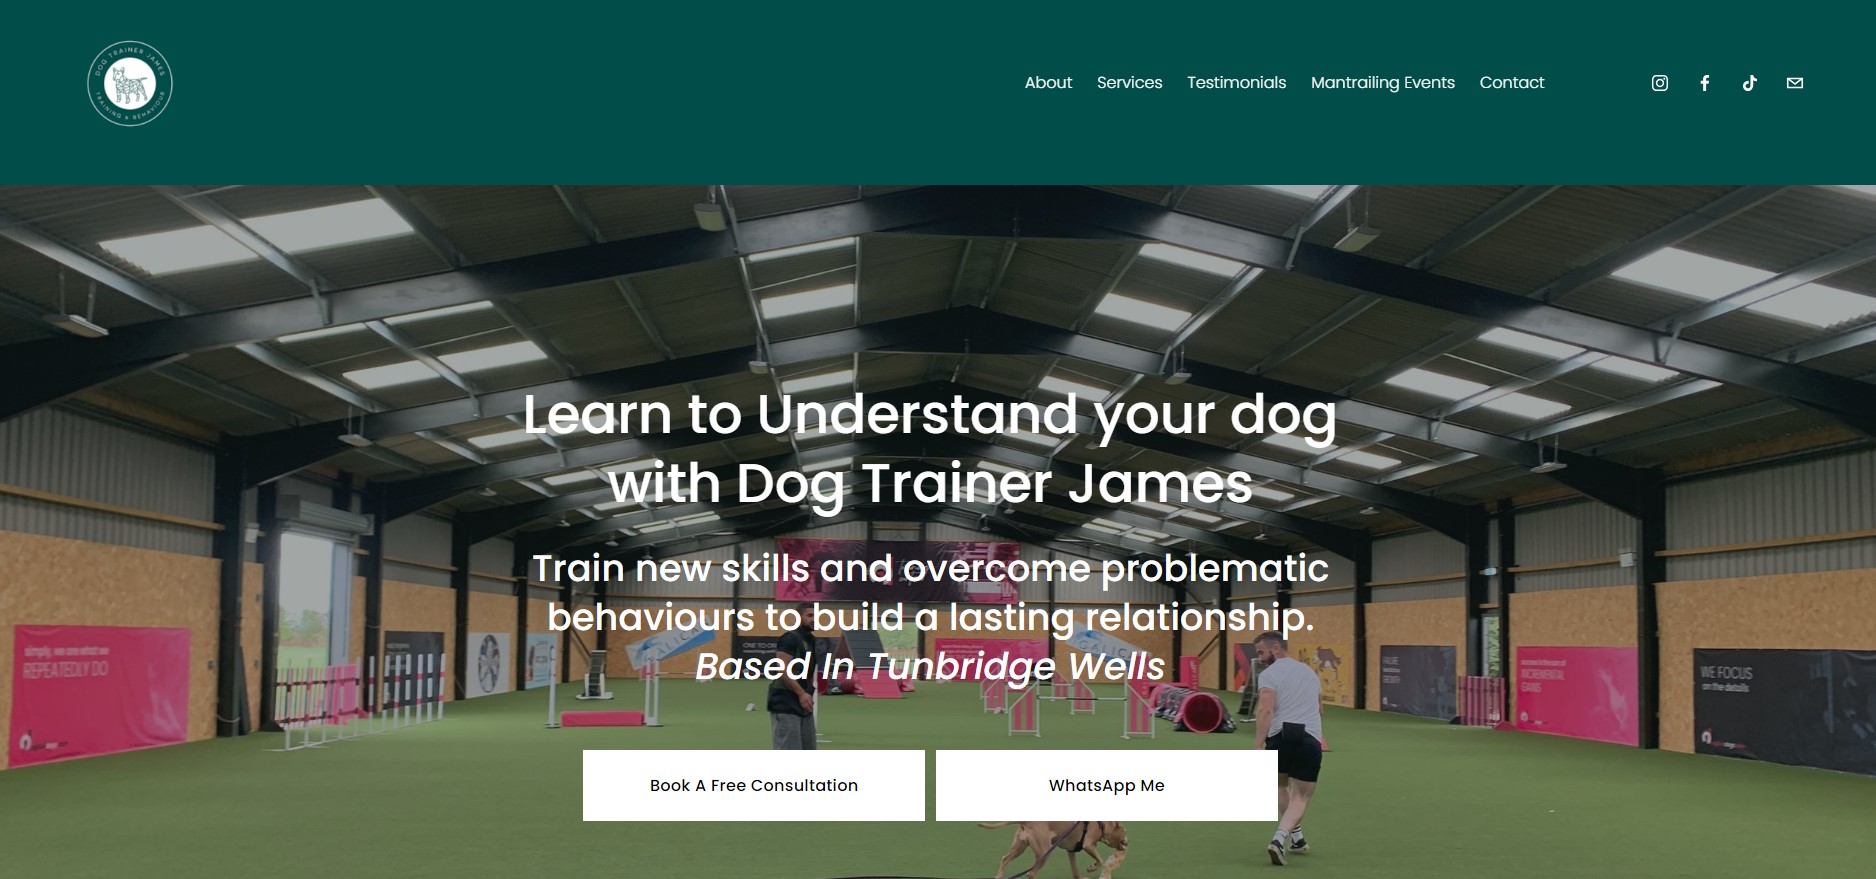 dog trainer James home page hero section 